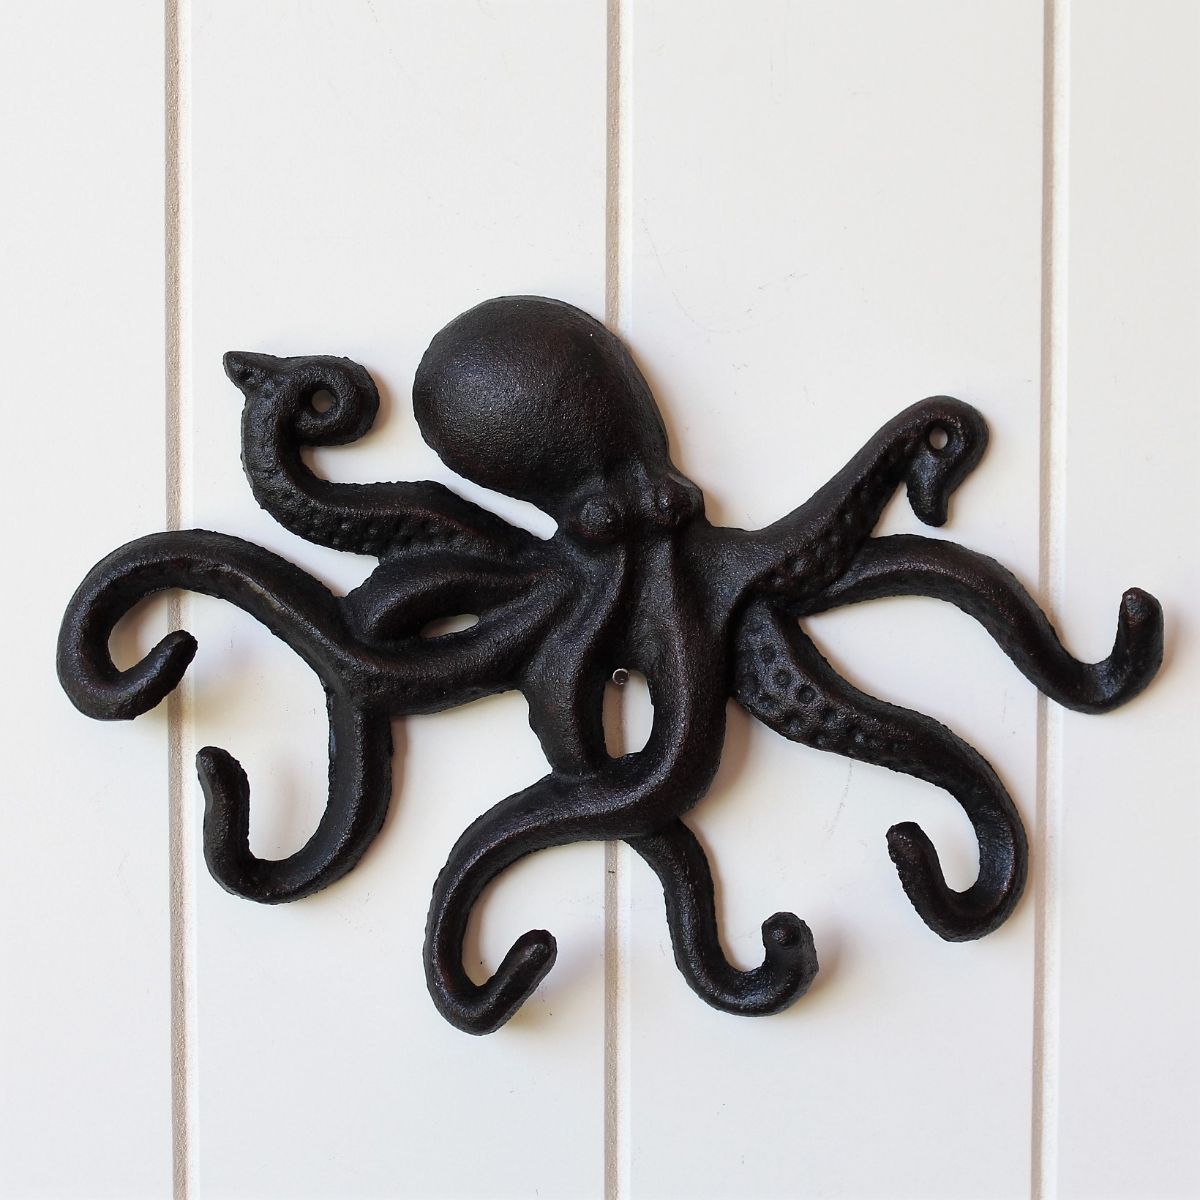  EatingBiting Heavy Duty 6 Tentacles Octopus Key Holder for Wall  Cast Iron Clothes Hooks Decorative Rustic Towel Hook with Screws, Rustic  Metal Clothing Hanger Solid Cast Iron Unique Key Holders 